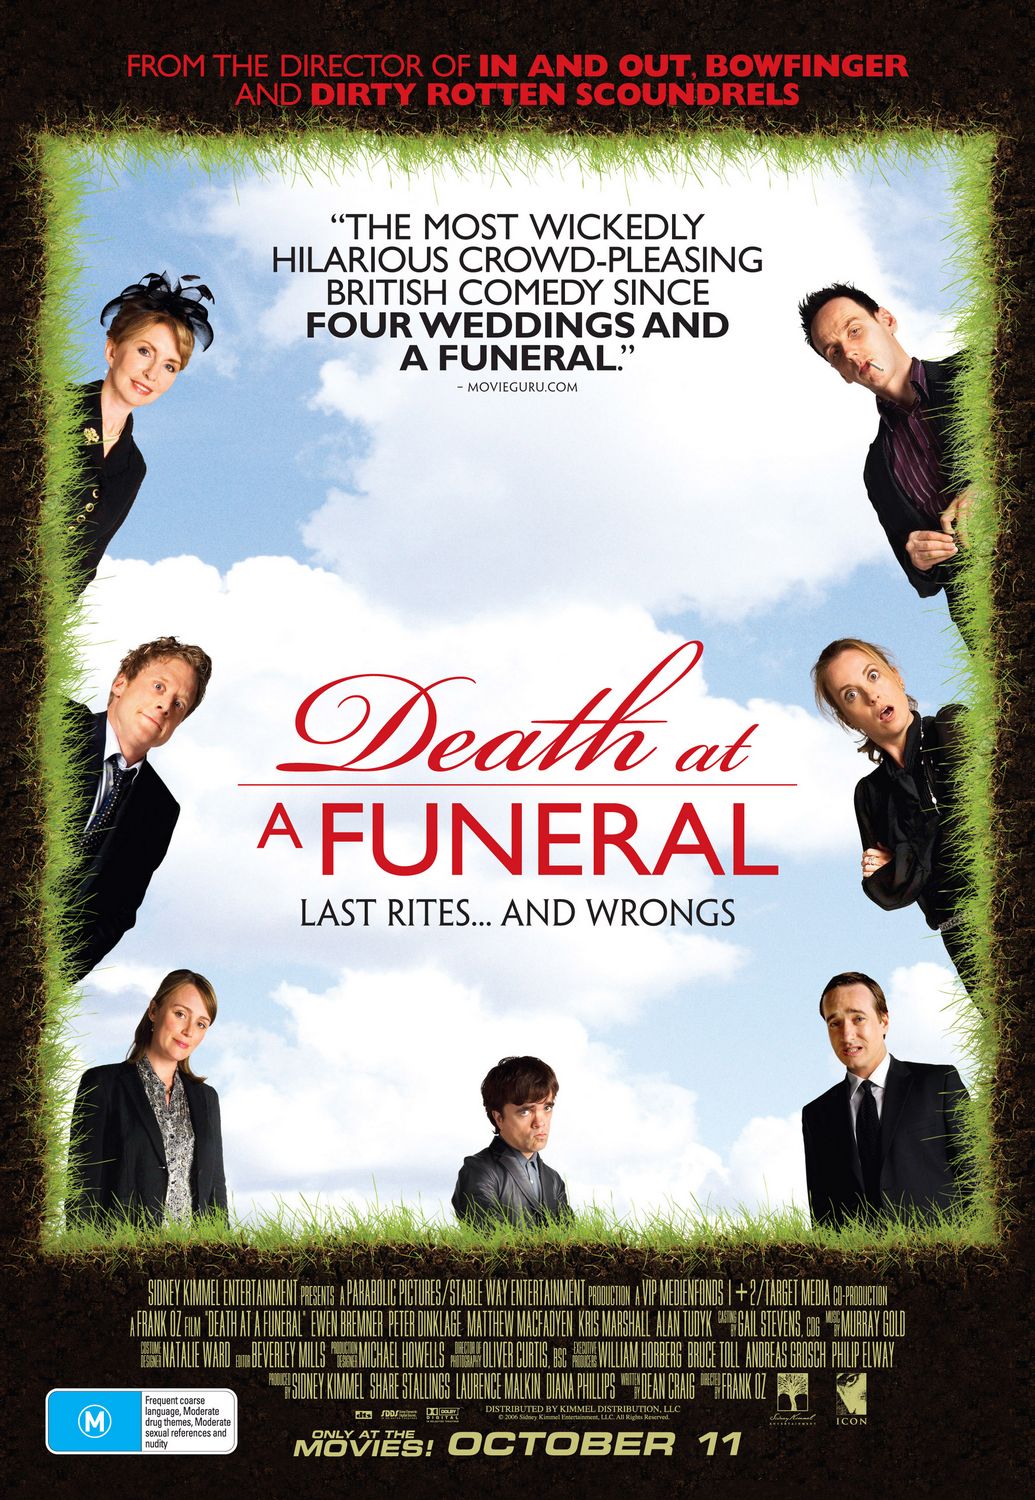 Extra Large Movie Poster Image for Death at a Funeral (#4 of 5)